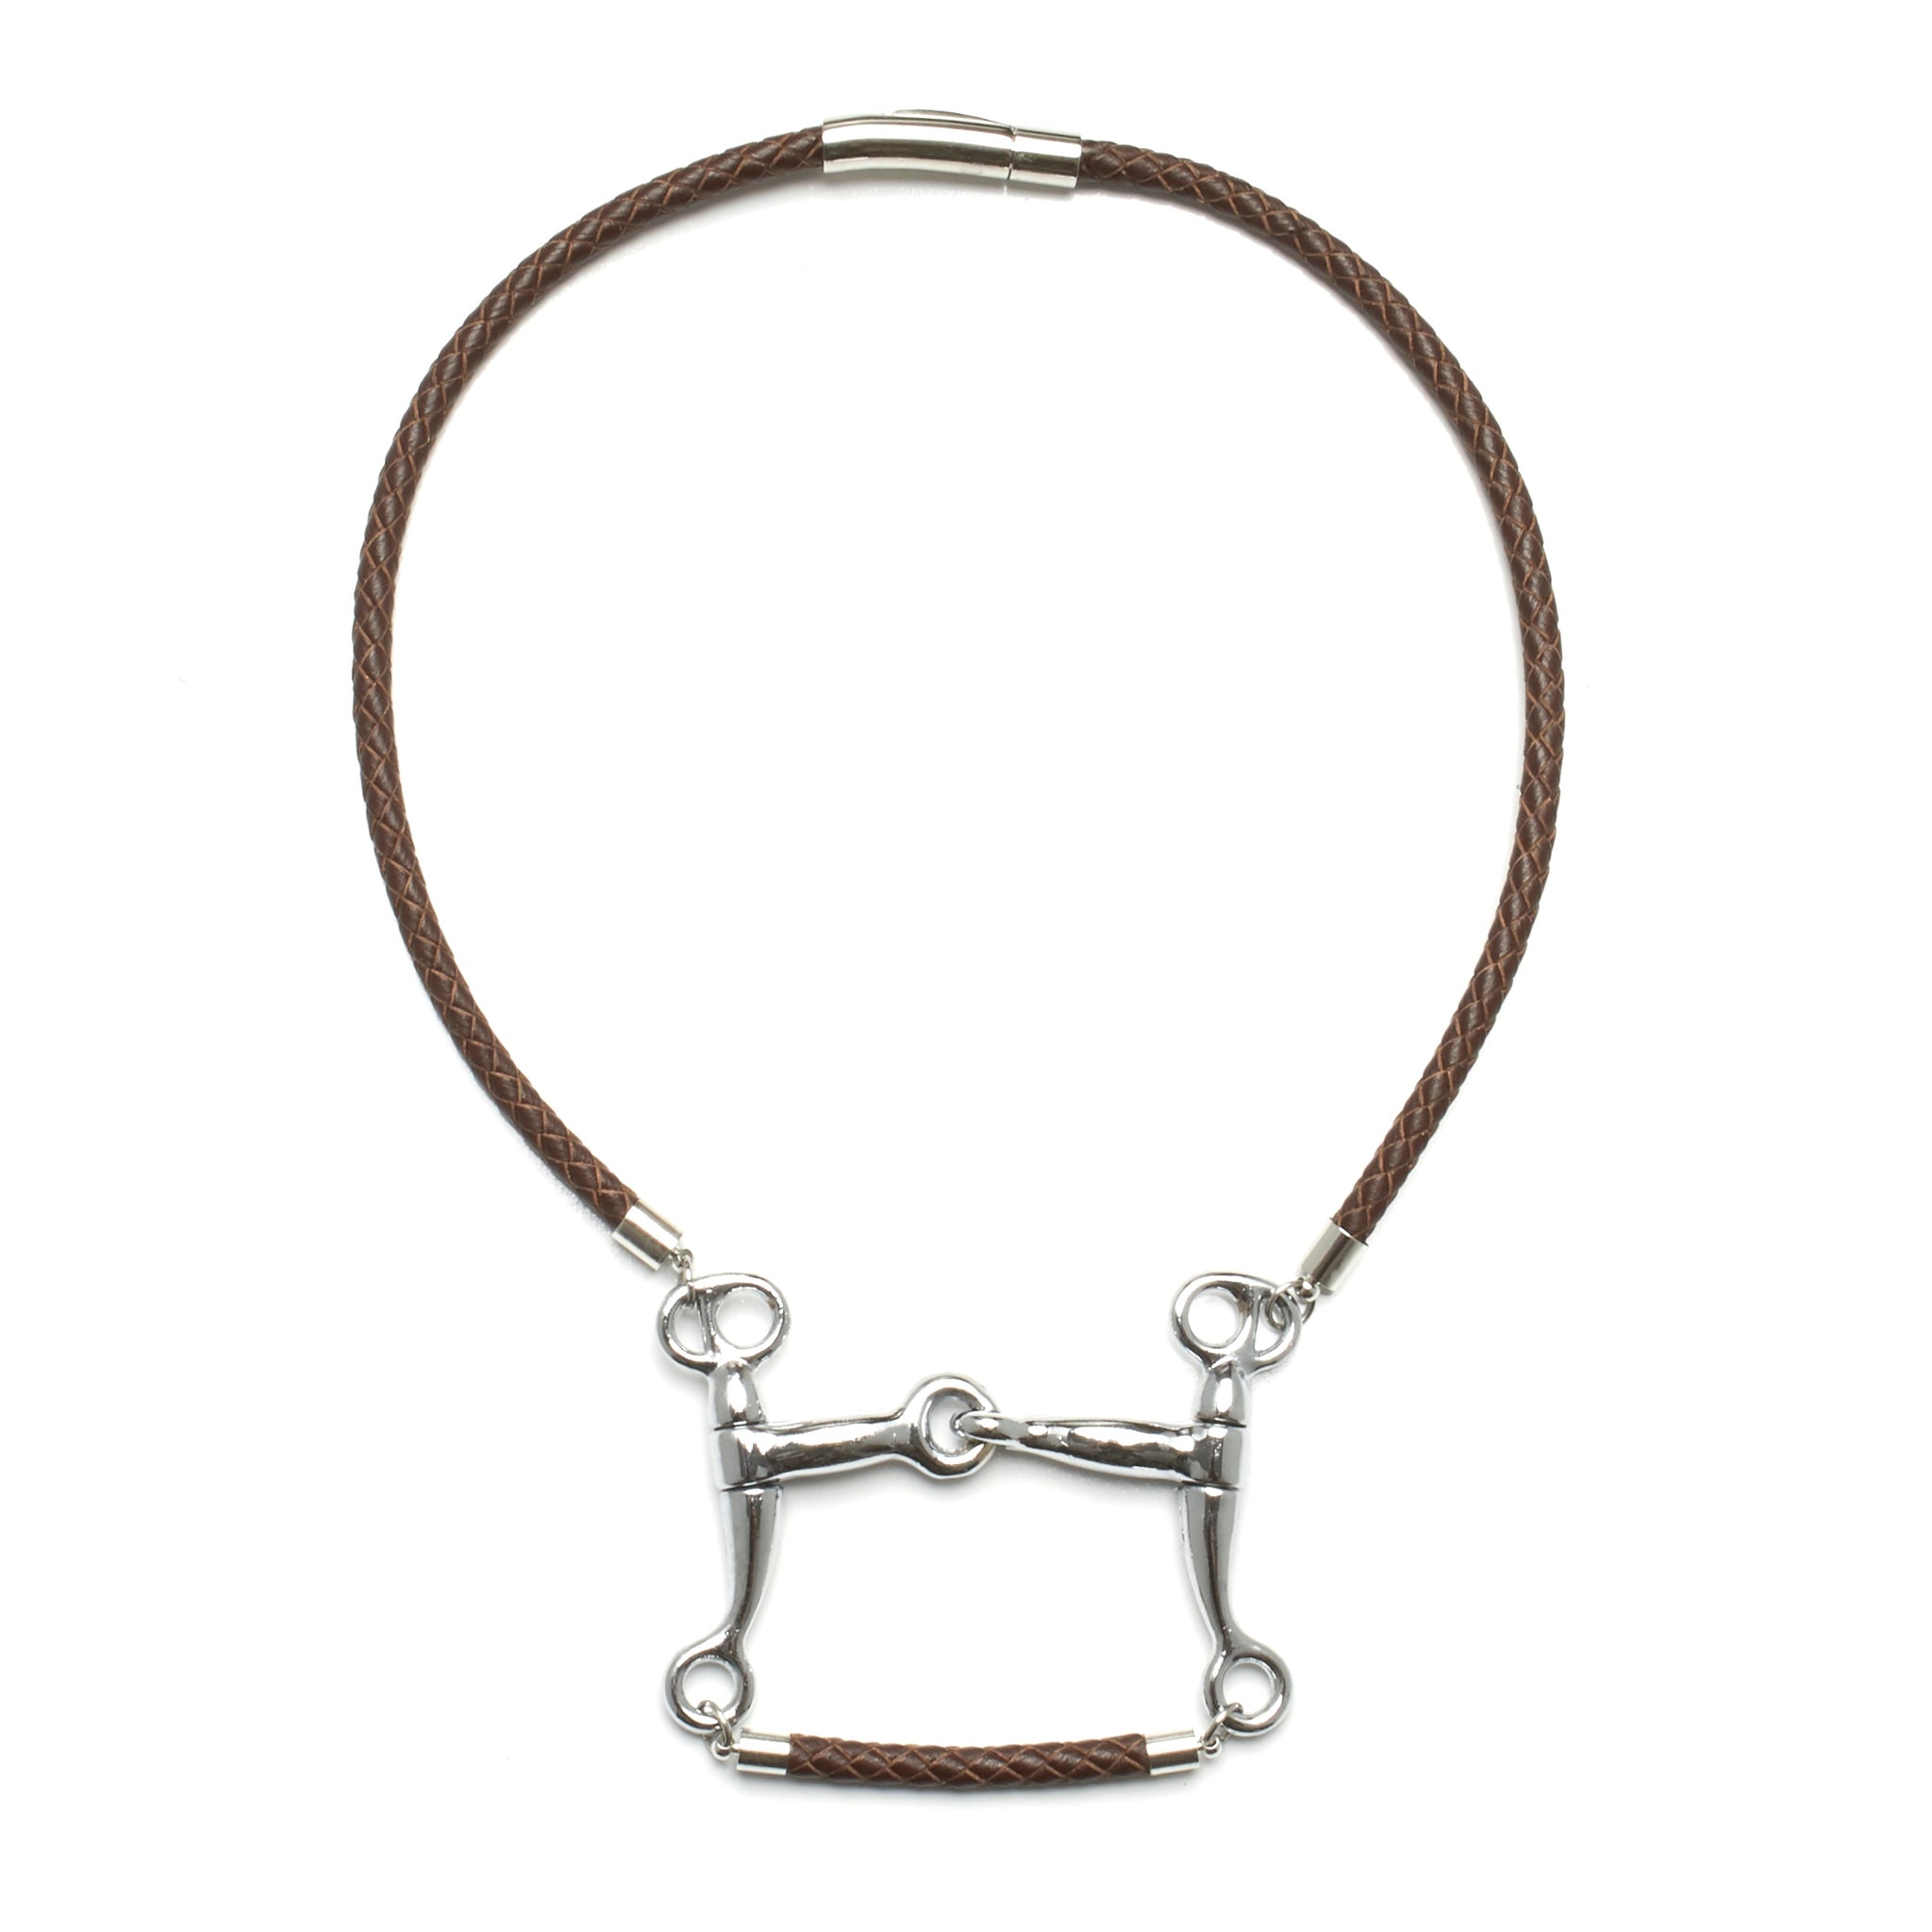 5 MM ROUND BRAIDED LEATHER NECKLACE WITH PELHAM HORSE BIT PENDANT AND LEATHER BAR by nyet jewelry